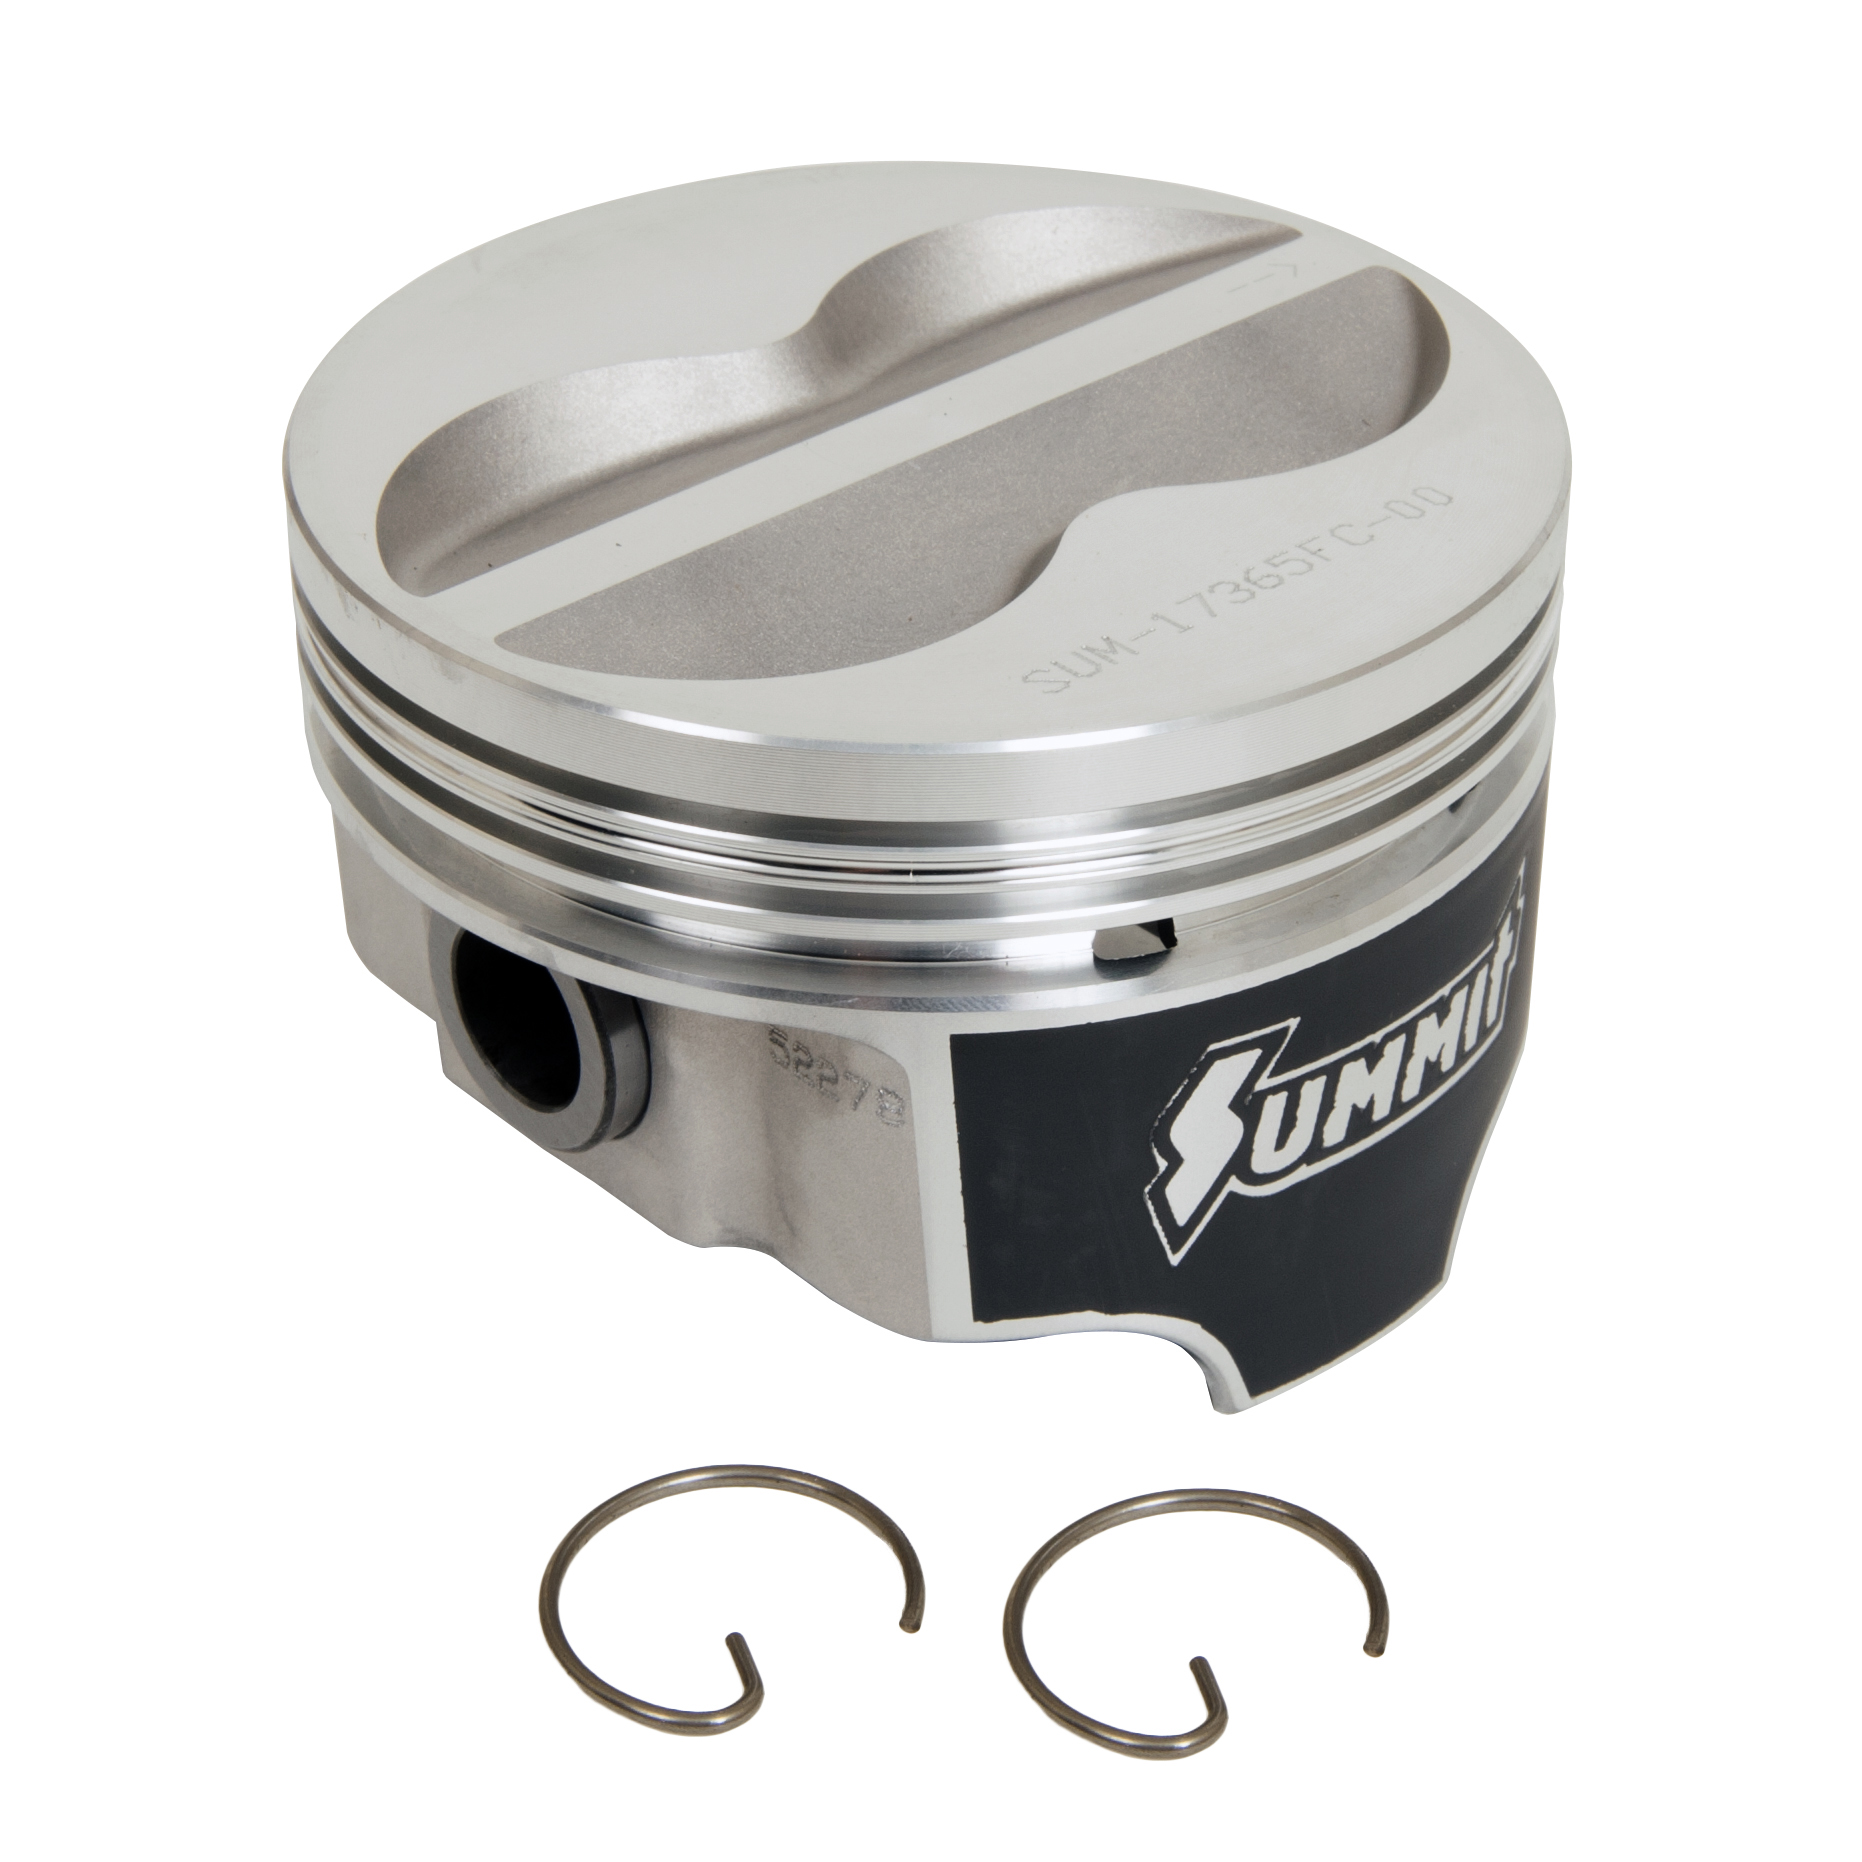 Summit Racing Coated Forged Piston for Small Block Chevy 350